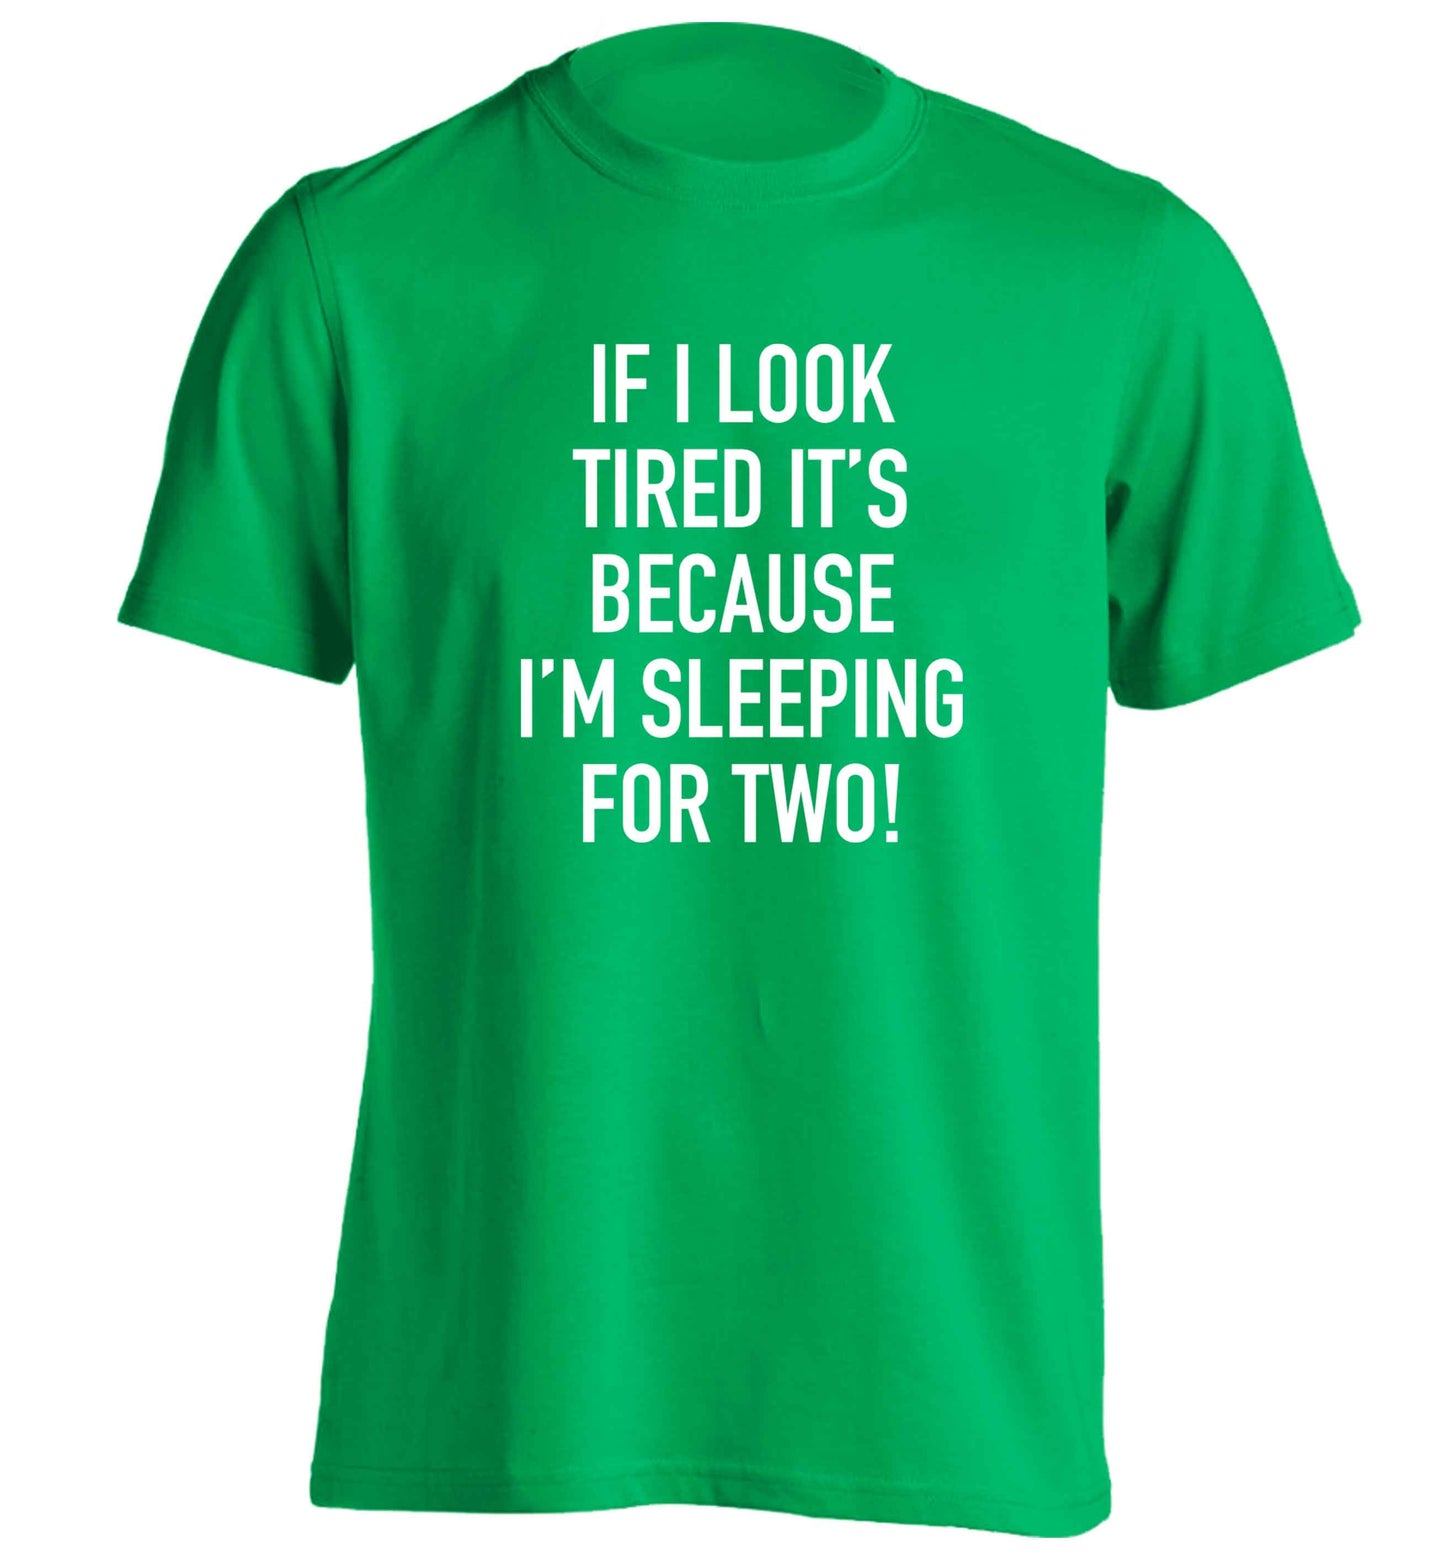 If I look tired it's because I'm sleeping for two adults unisex green Tshirt 2XL